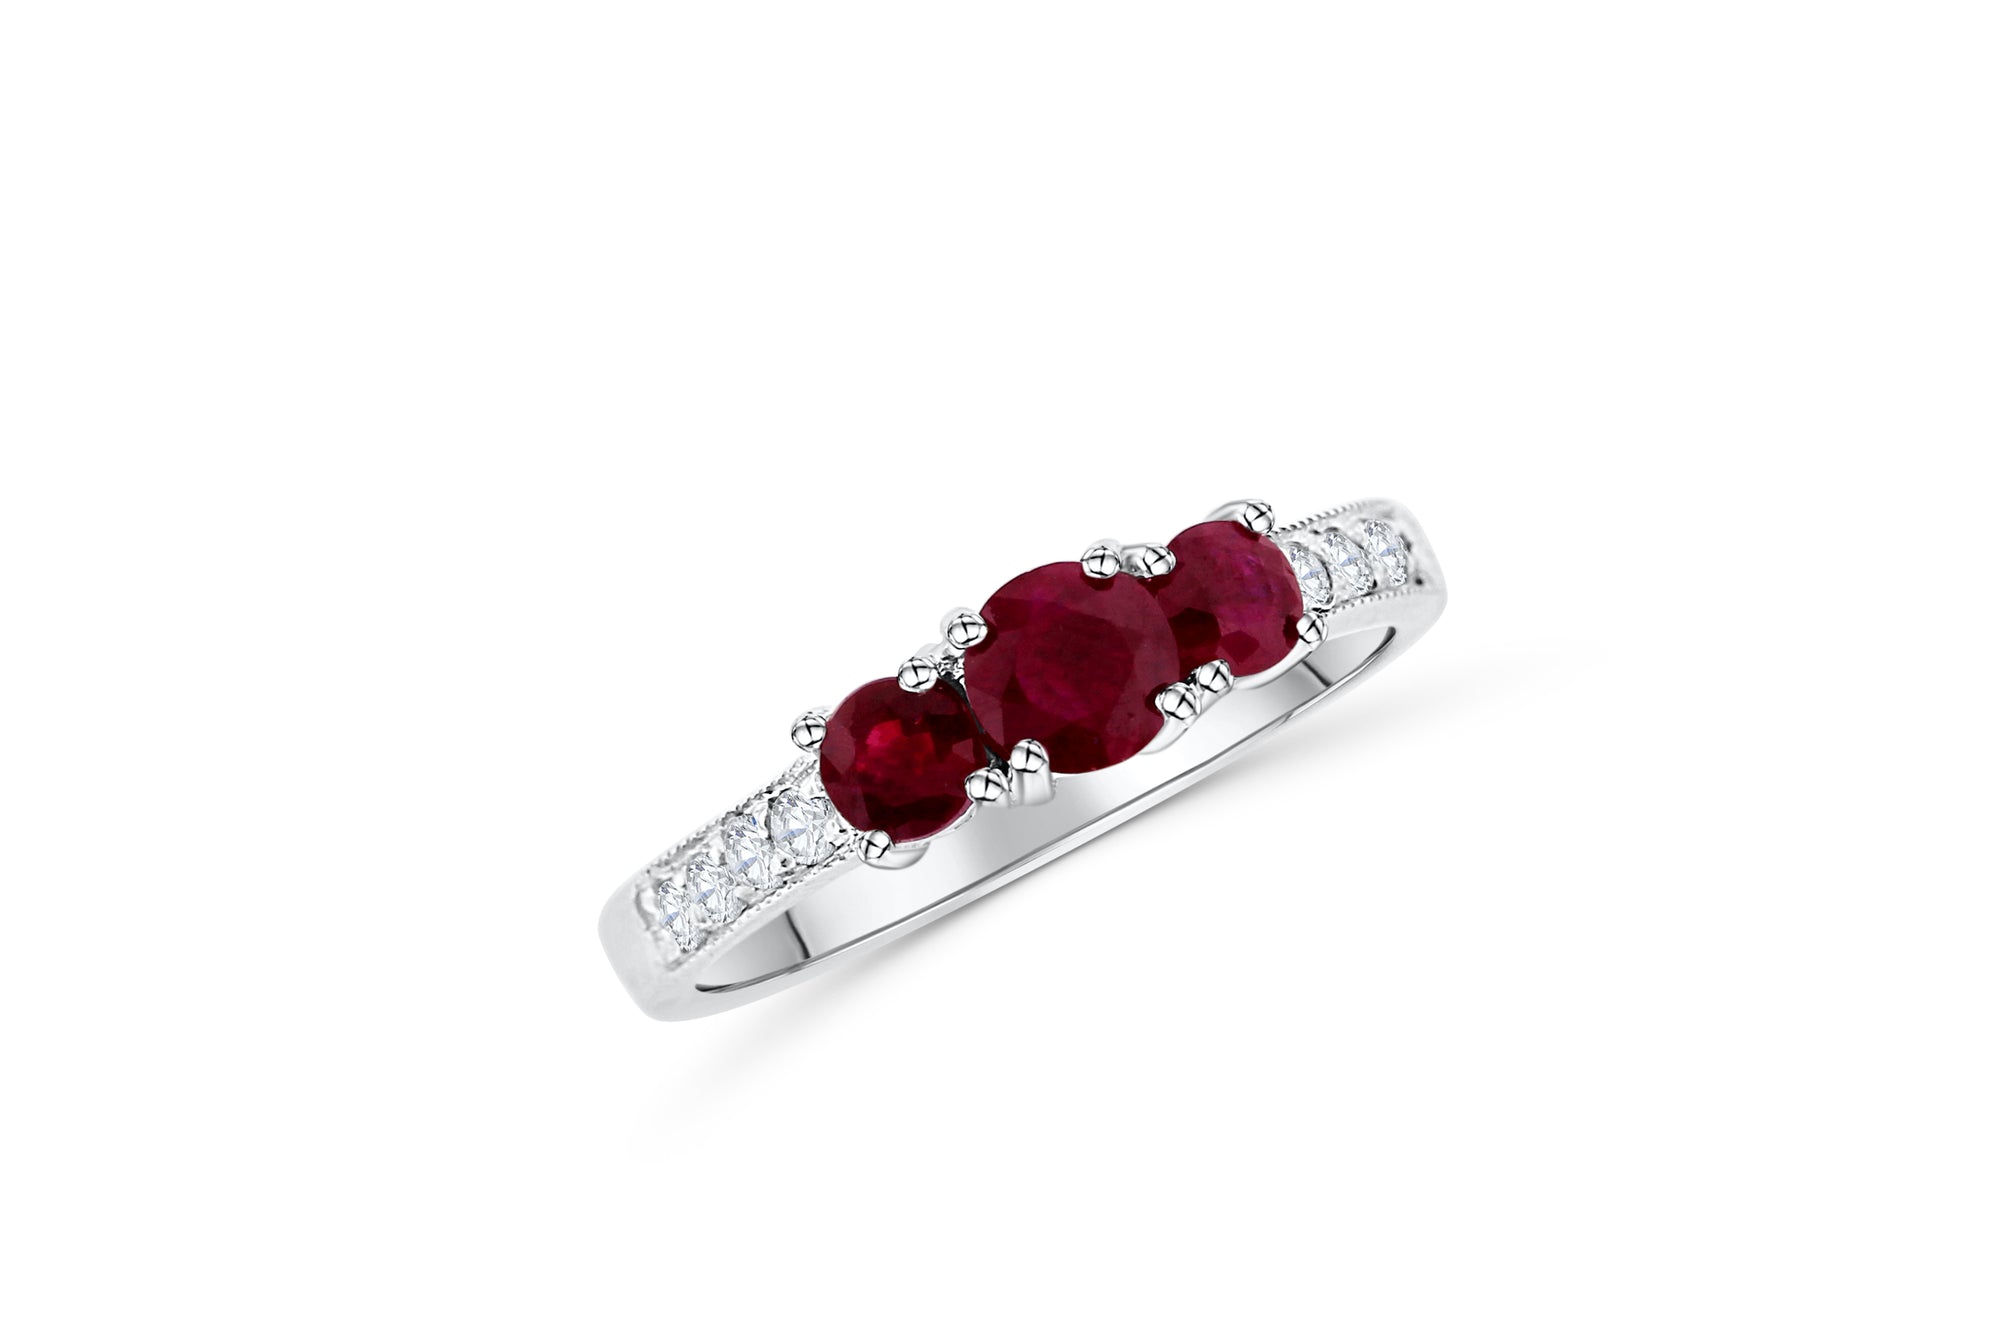 0.68 CT Ruby Diamond Ring 0.11 CT TW 14K White Gold RBR001 - NorthandSouthJewelry